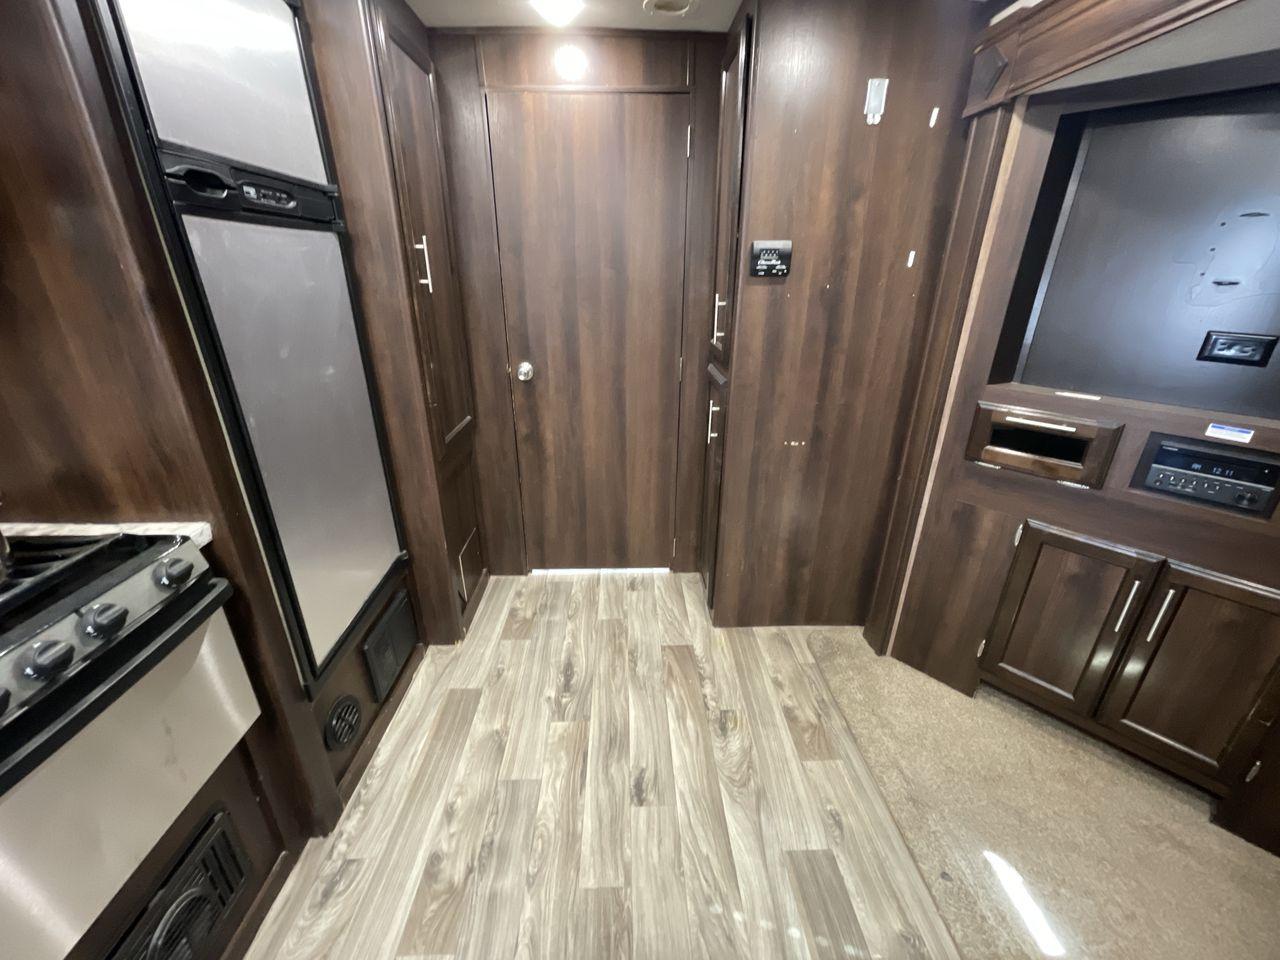 2018 WHITE JAYCO JAY FLIGHT 23MRB (1UJBJ0BN5J1) , Length: 28.17 ft | Dry Weight: 5,560 lbs. | Gross Weight: 7,250 lbs. | Slides: 1 transmission, located at 4319 N Main Street, Cleburne, TX, 76033, (817) 221-0660, 32.435829, -97.384178 - The 2018 Jayco Jay Flight 23MRB is a travel trailer that encapsulates both compactness and luxury for unparalleled camping experiences. Spanning 28 feet in length, this model boasts a thoughtfully arranged interior featuring a single slide-out, seamlessly amplifying the living space. The Jay Flight - Photo #13